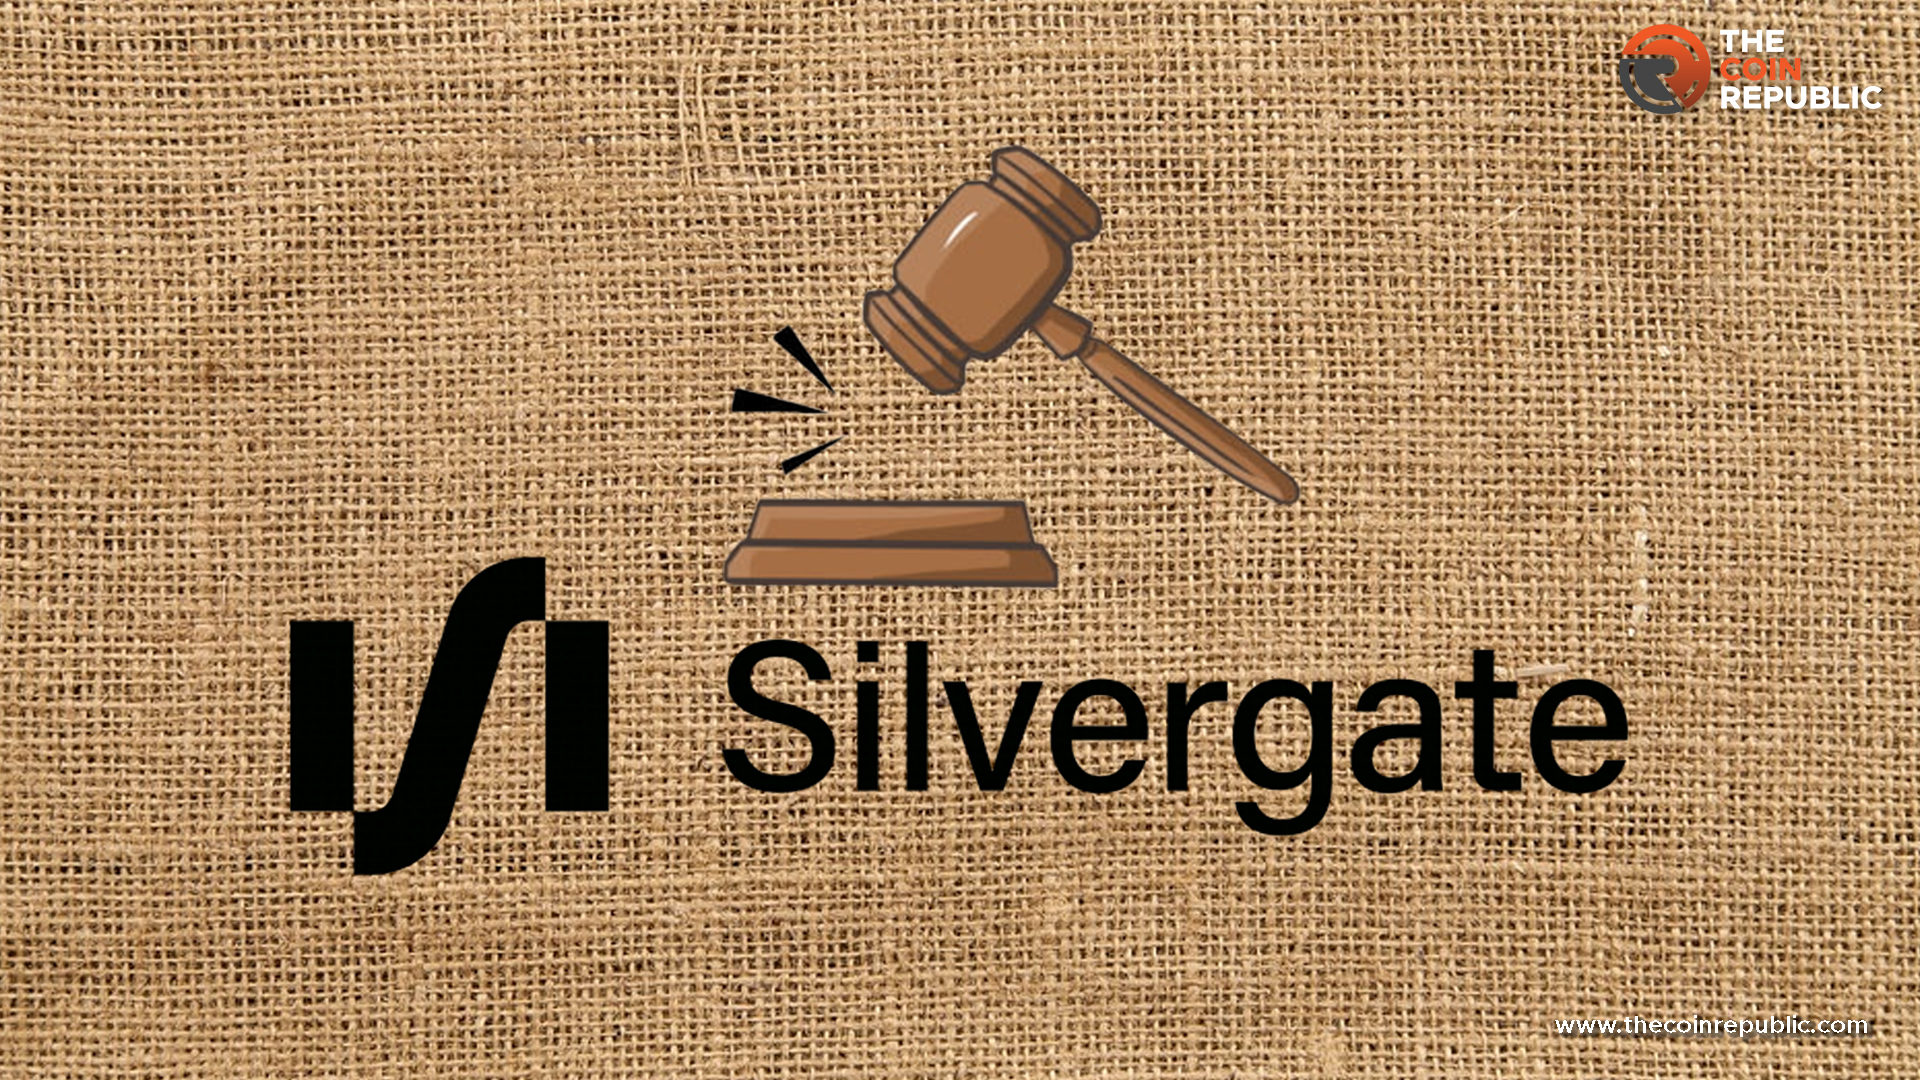 Did Lawsuit Against Silvergate Result In Stock Price Drop?